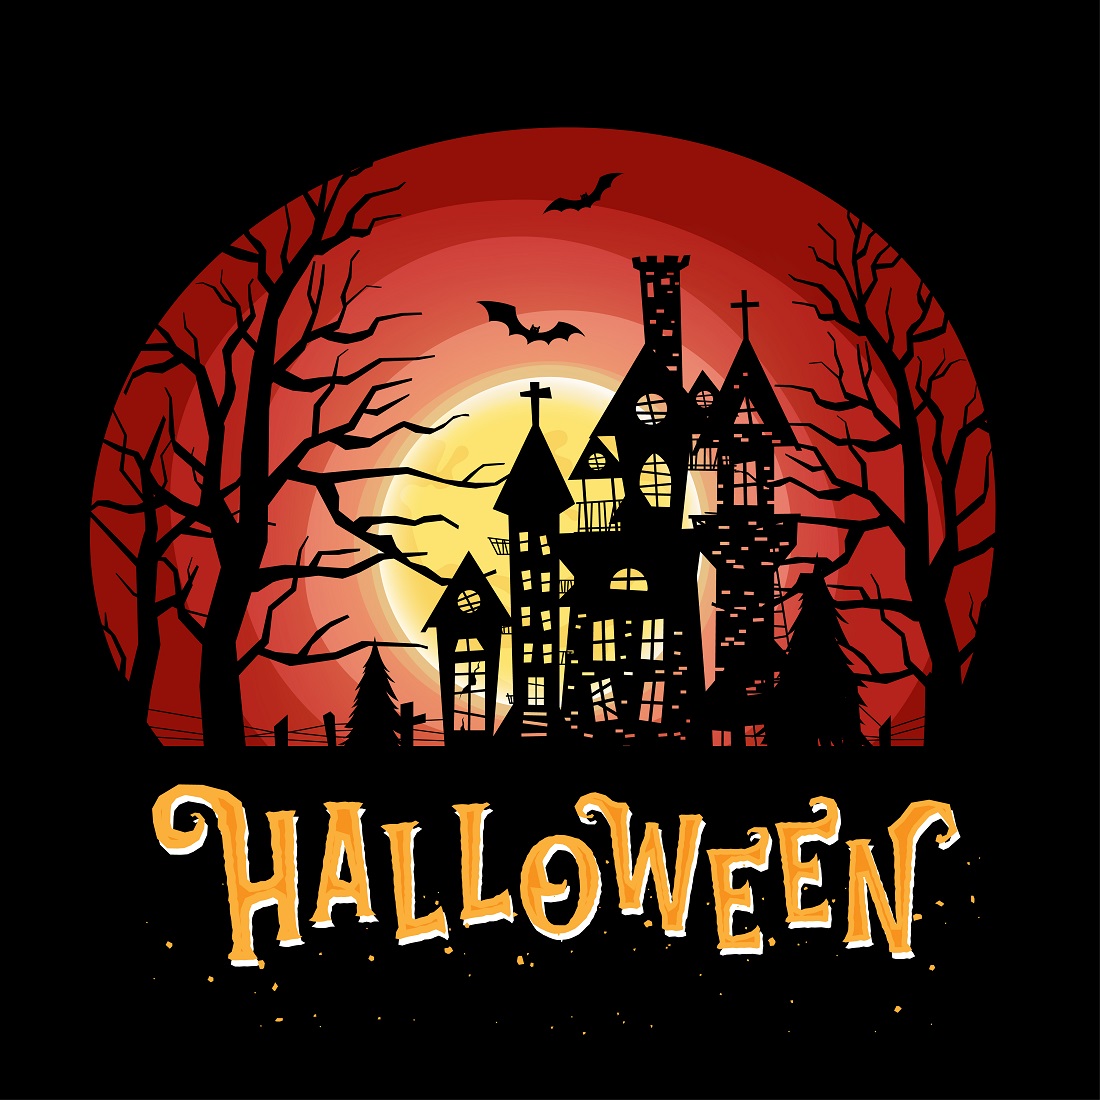 Halloween celebration with night scary castle preview image.